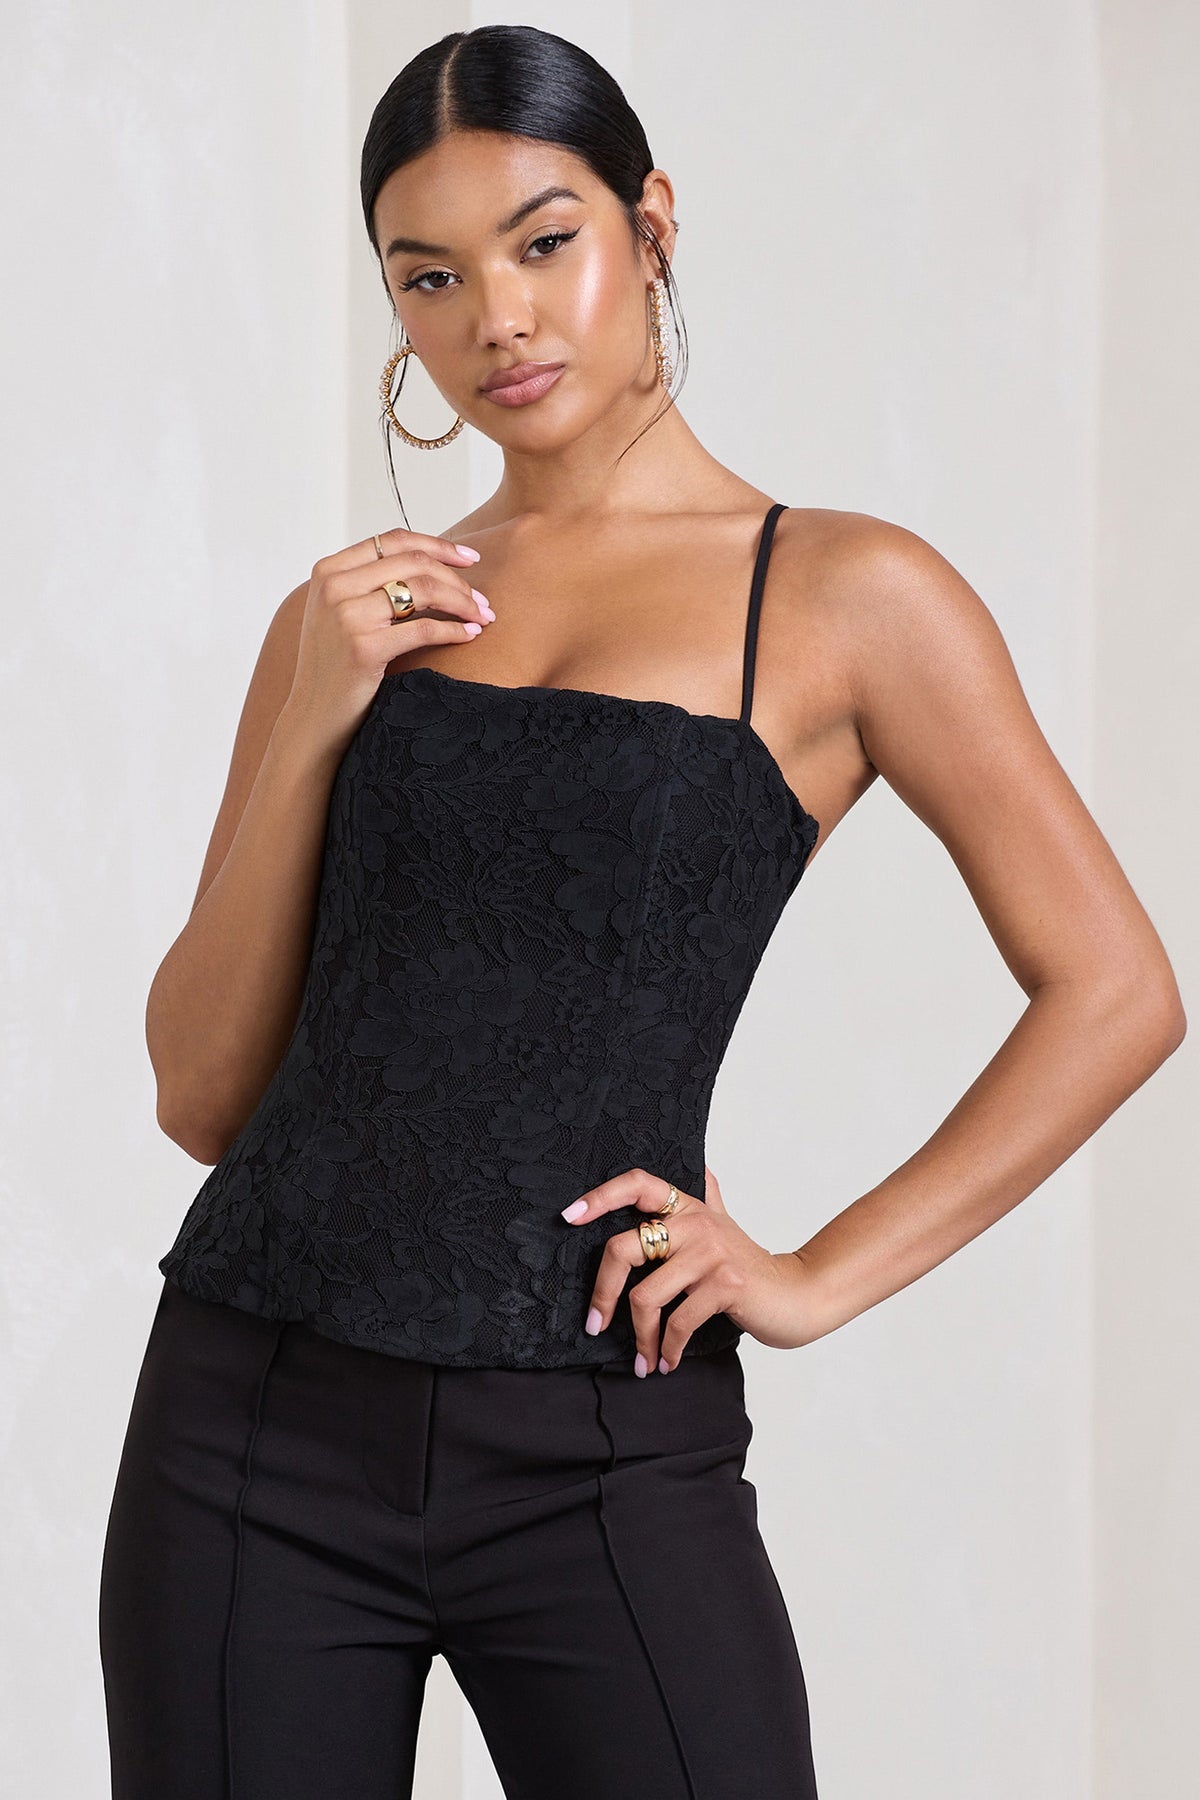 Get the top for $59 at urbanoutfitters.com - Wheretoget  Black lace corset  top, Bustier top outfits, Black corset top